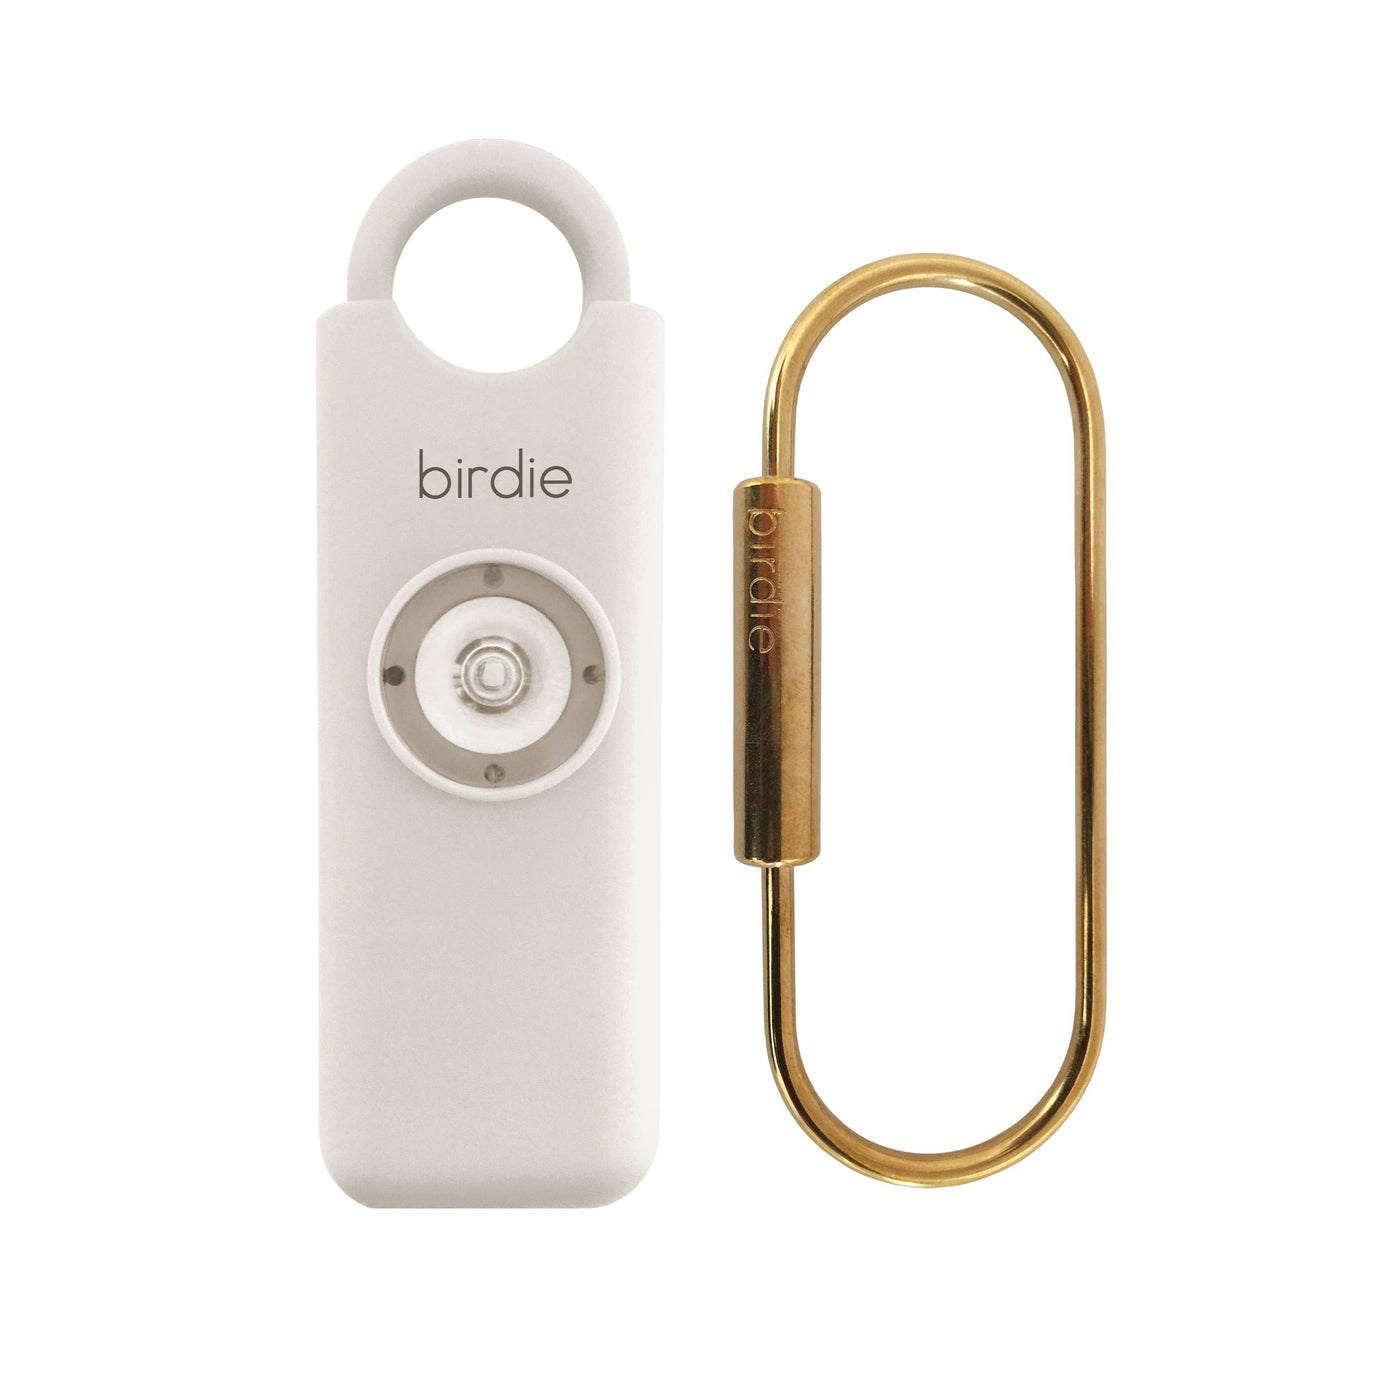 She's Birdie Personal Safety Alarm: Single / Coral